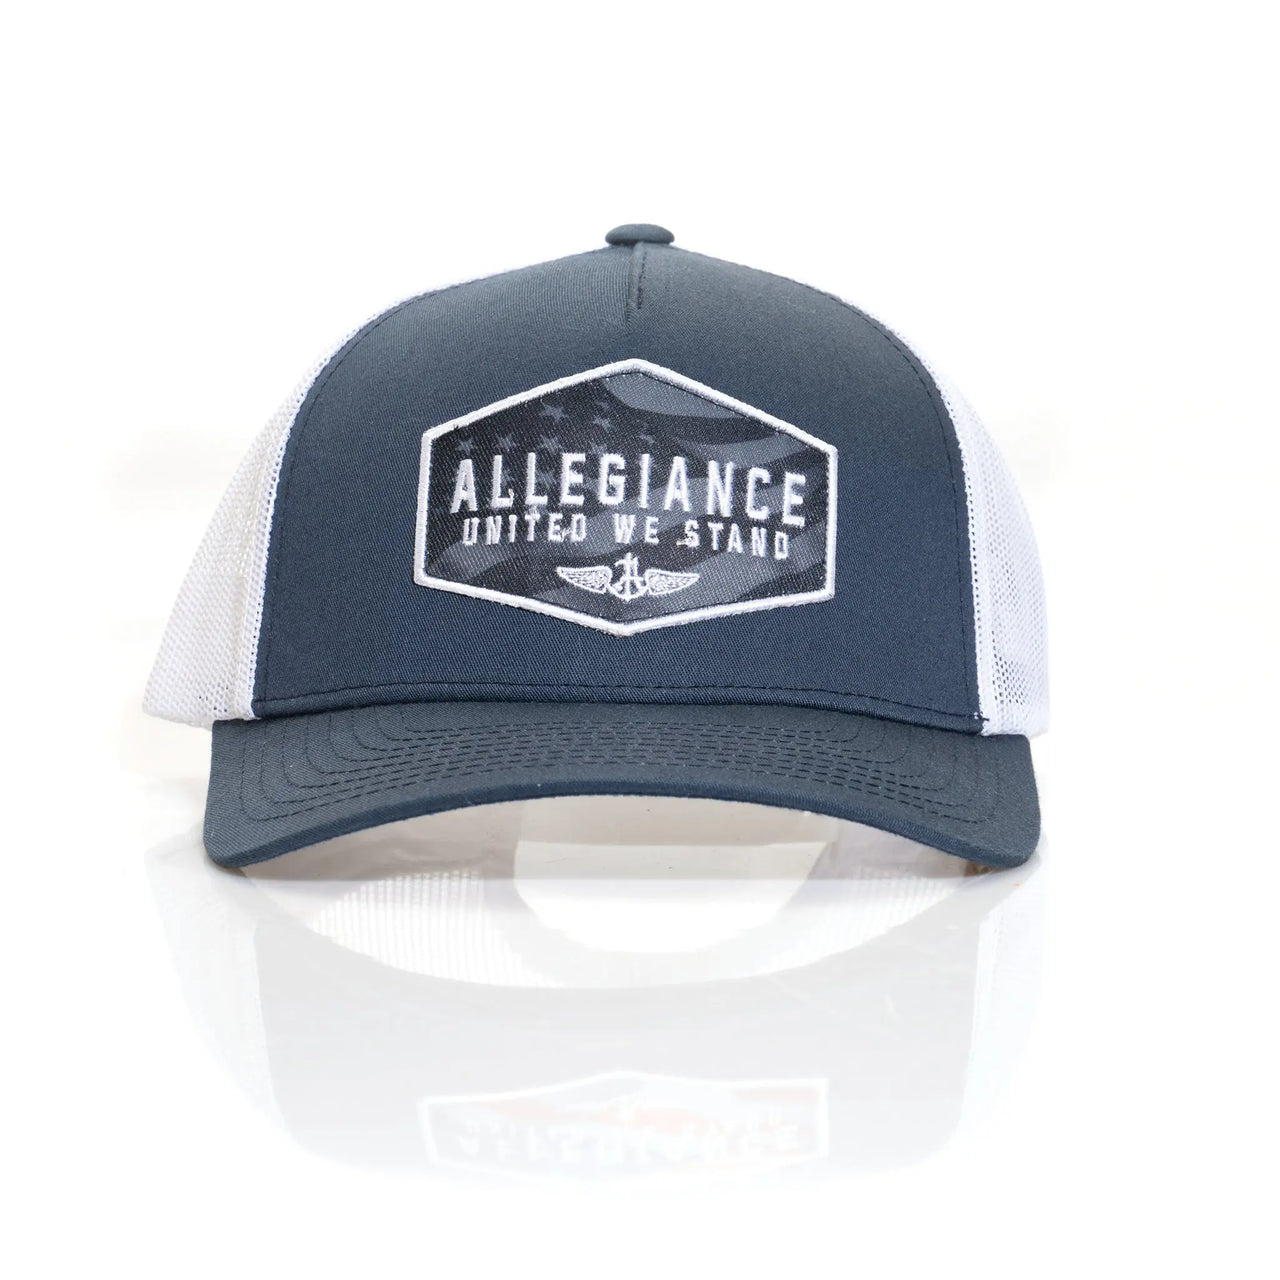 Glory Stealth Curved Trucker